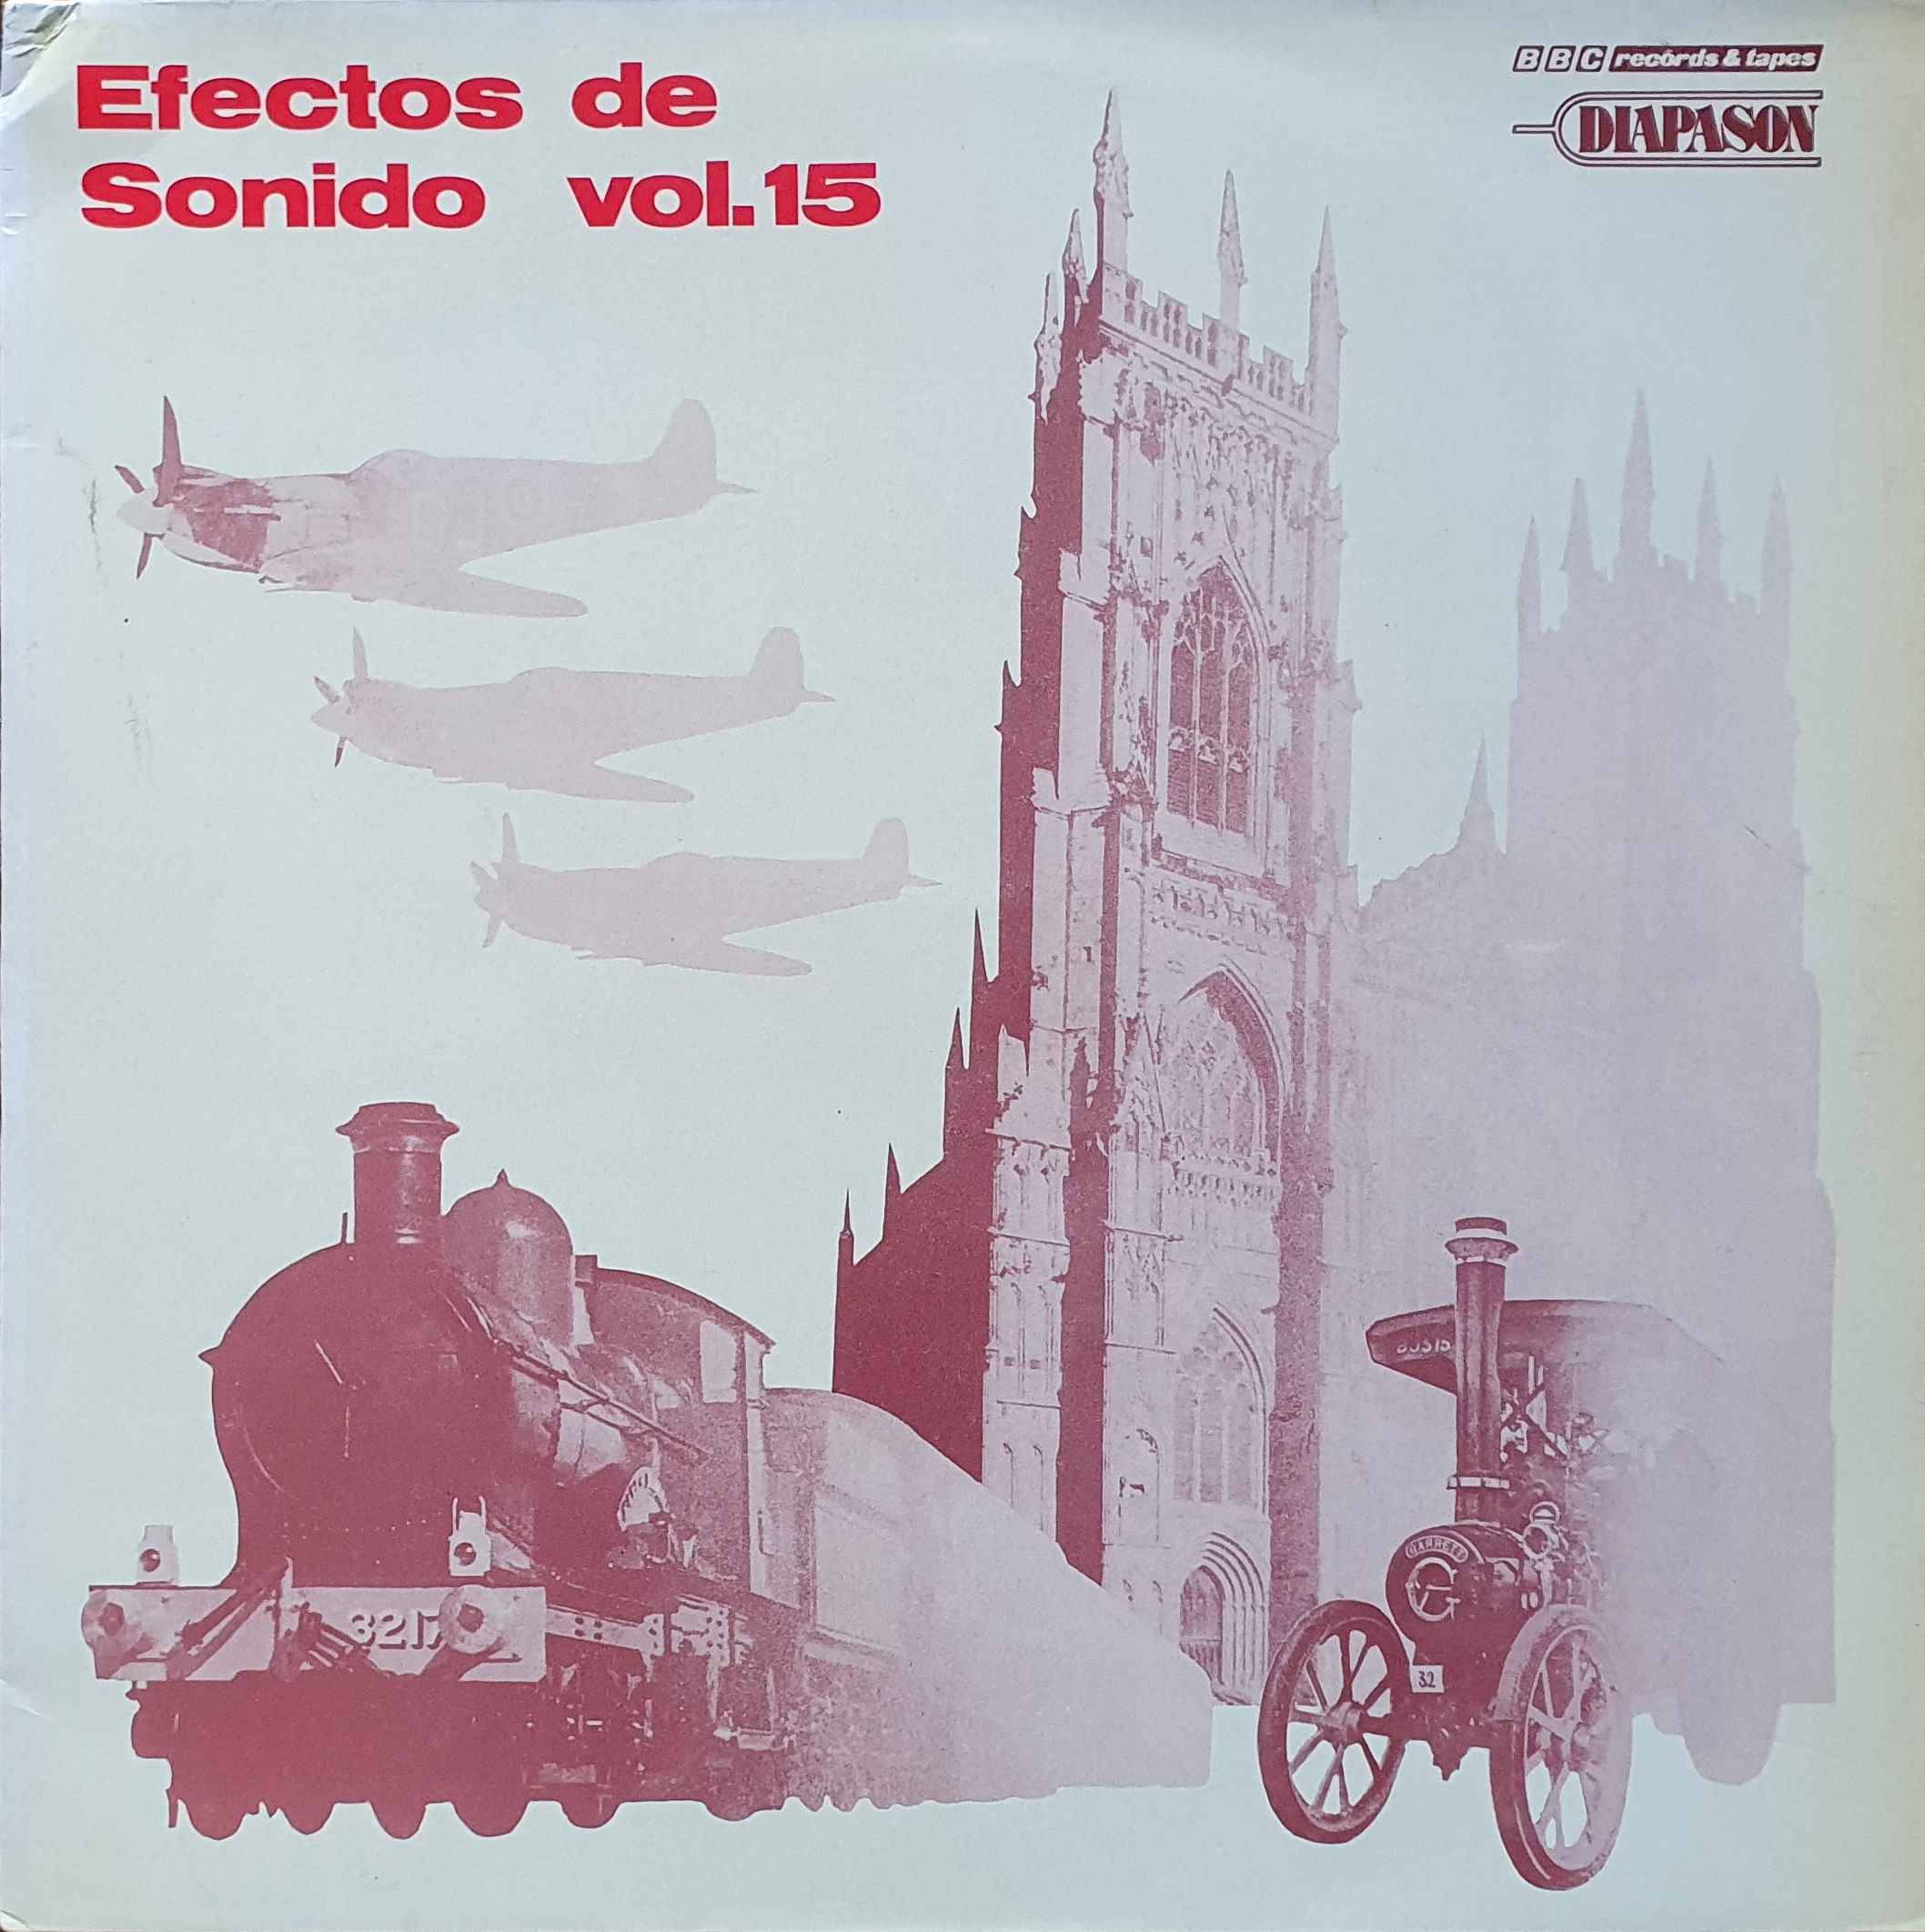 Picture of 51.0119 Efectos de sonido Vol. 15 (Spanish import) by artist Various from the BBC albums - Records and Tapes library